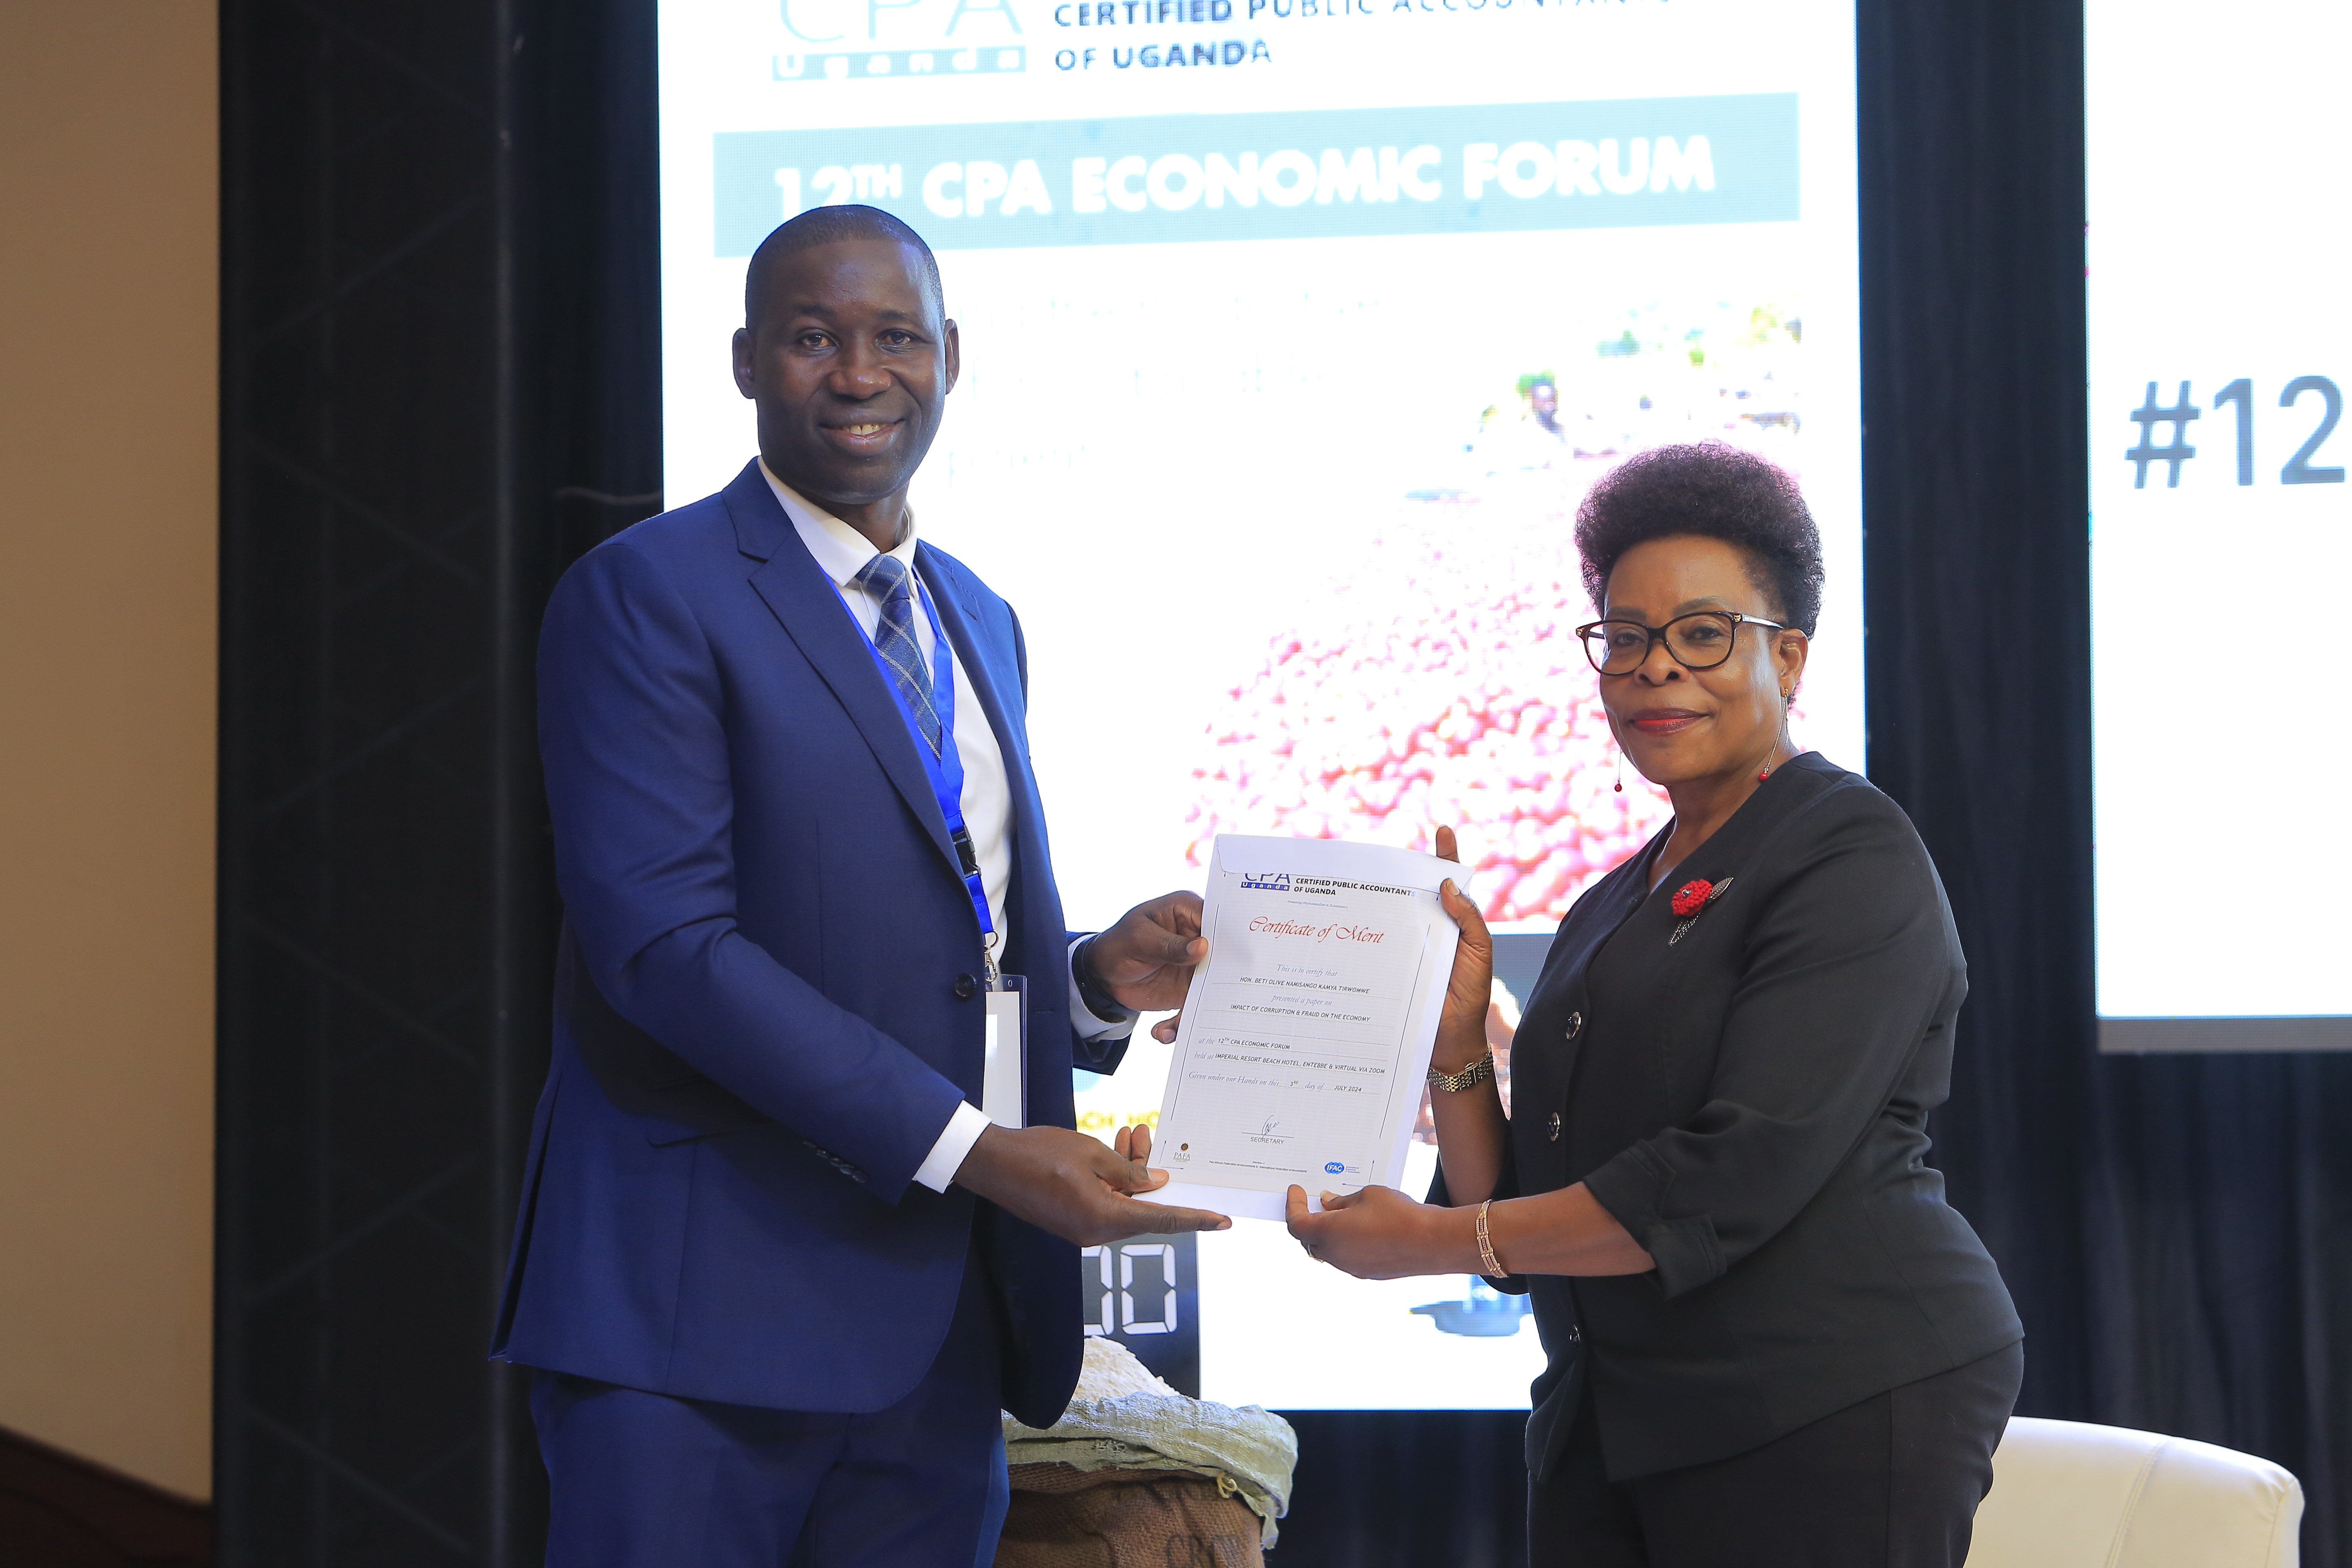 Beti Kamya Turwomwe, Inspector General of Government of Uganda (R) receiving a certificate of merit from CPA Geofrey Byamugisha (L) at the 12th Economic Forum.